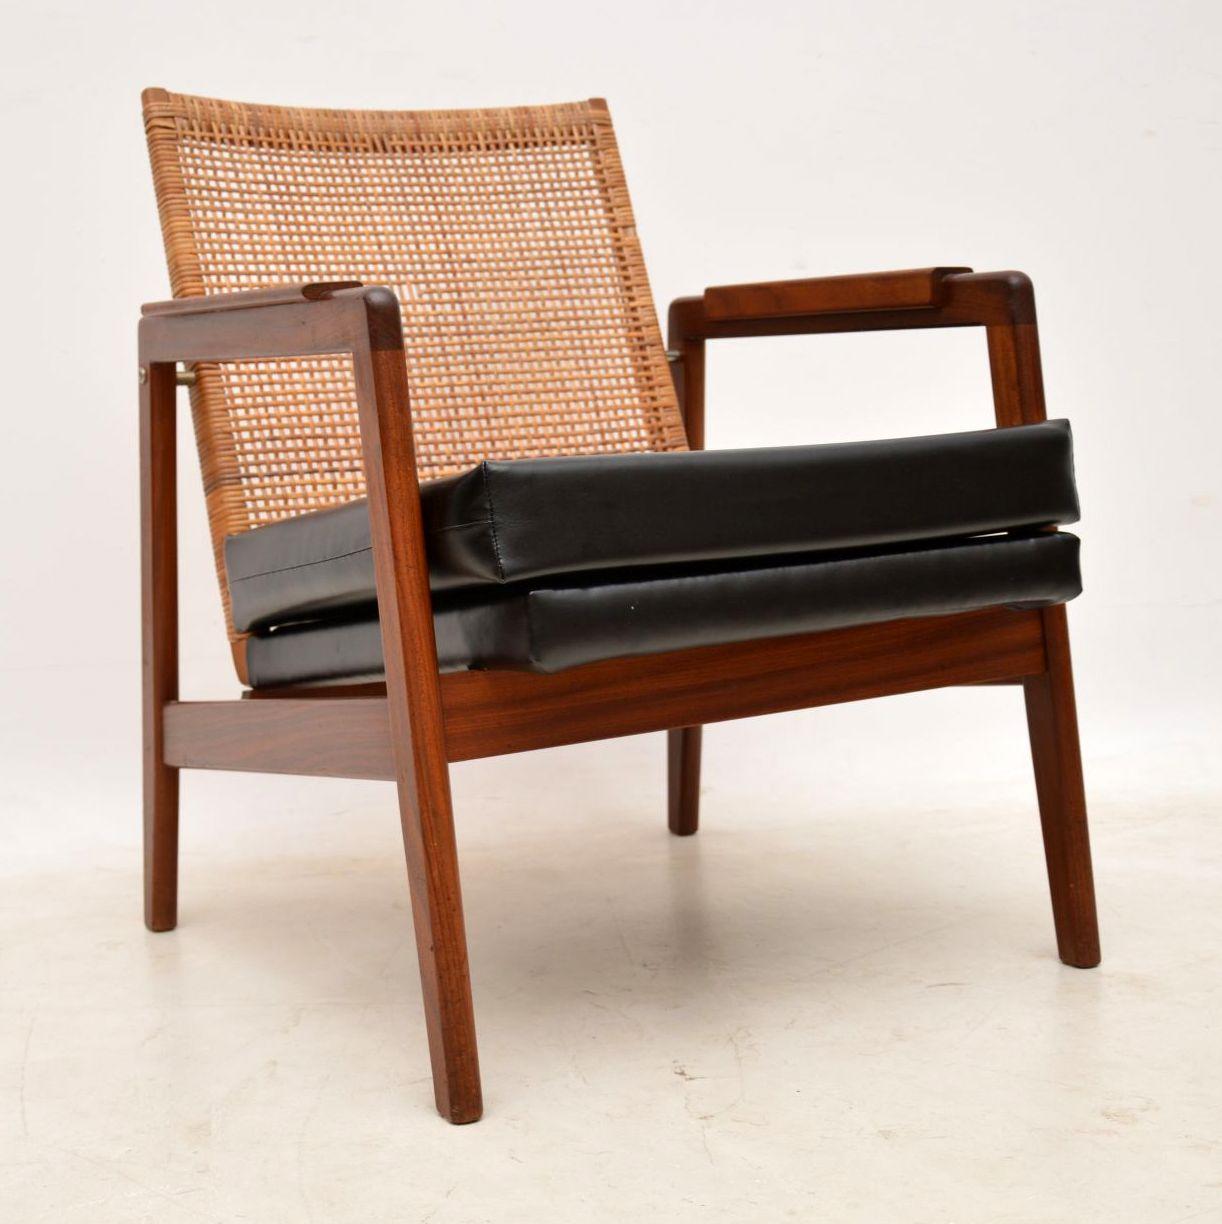 A striking pair of vintage armchairs, these were made in Holland during the 1960s. They were designed by PJ Muntendam and made by Gebroeders, they are of excellent quality and are in excellent condition for their age. The rattan backs give a